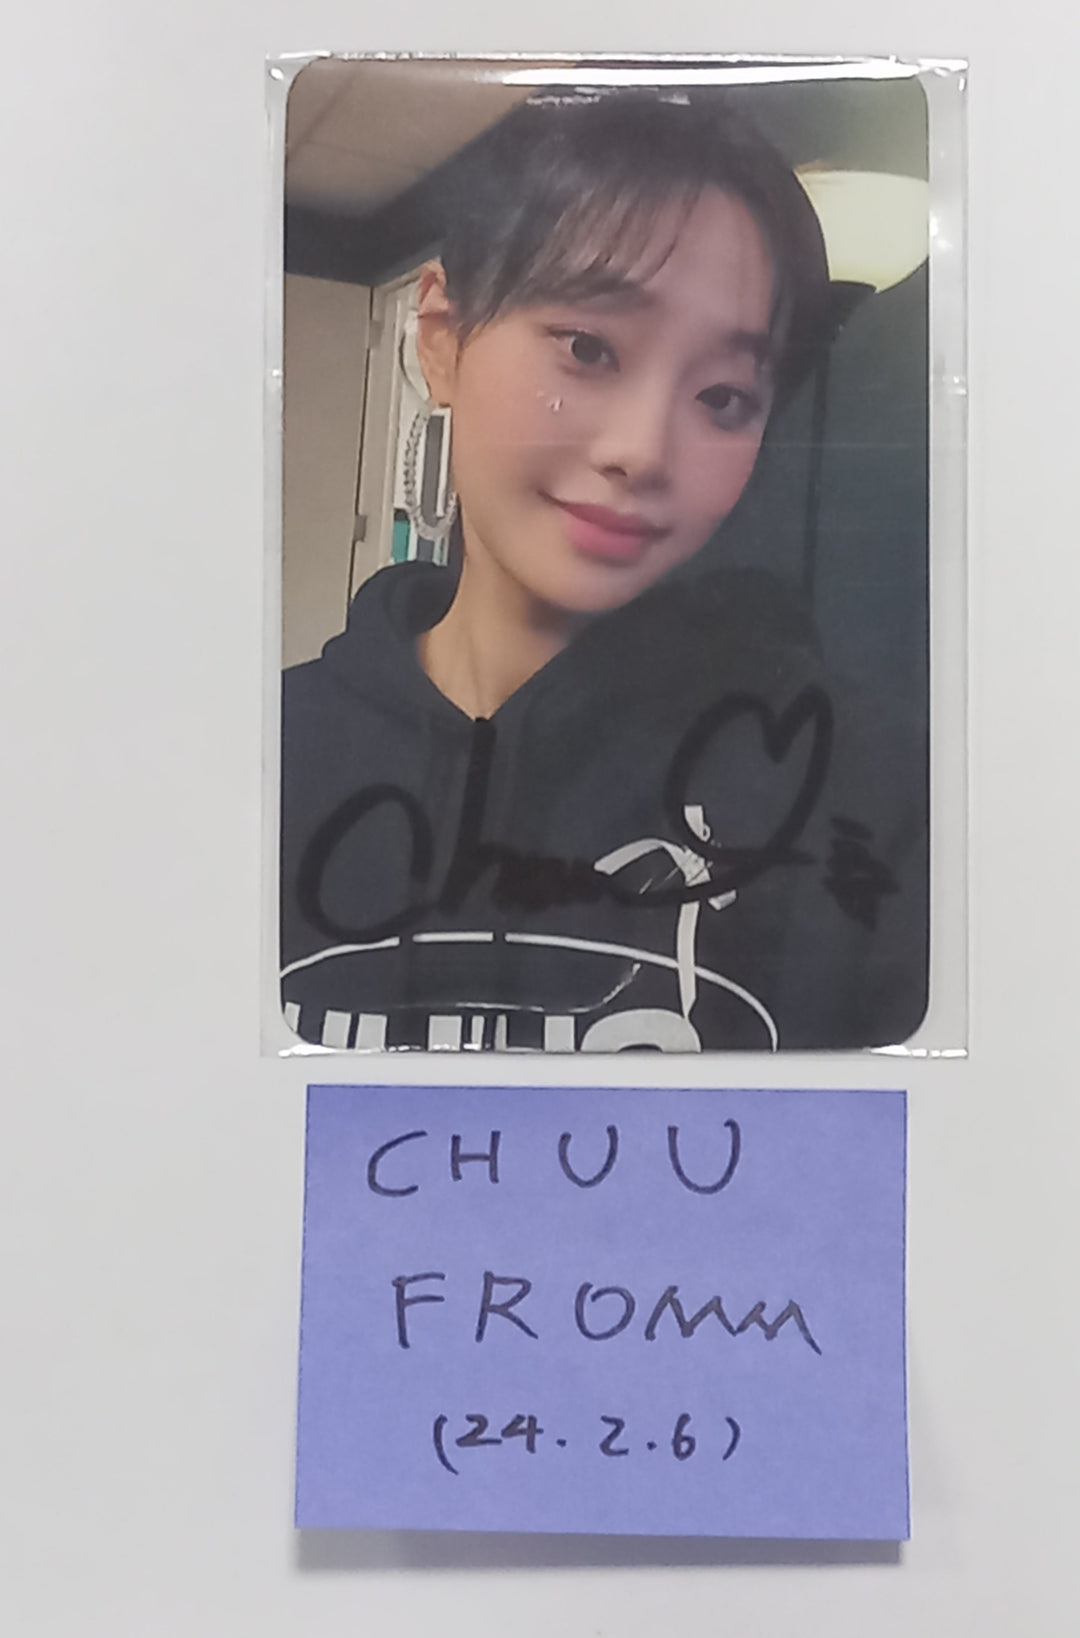 CHUU "Howl" - Hand Autographed(Signed) Fromm Lucky Draw Event Photocard [24.2.6]